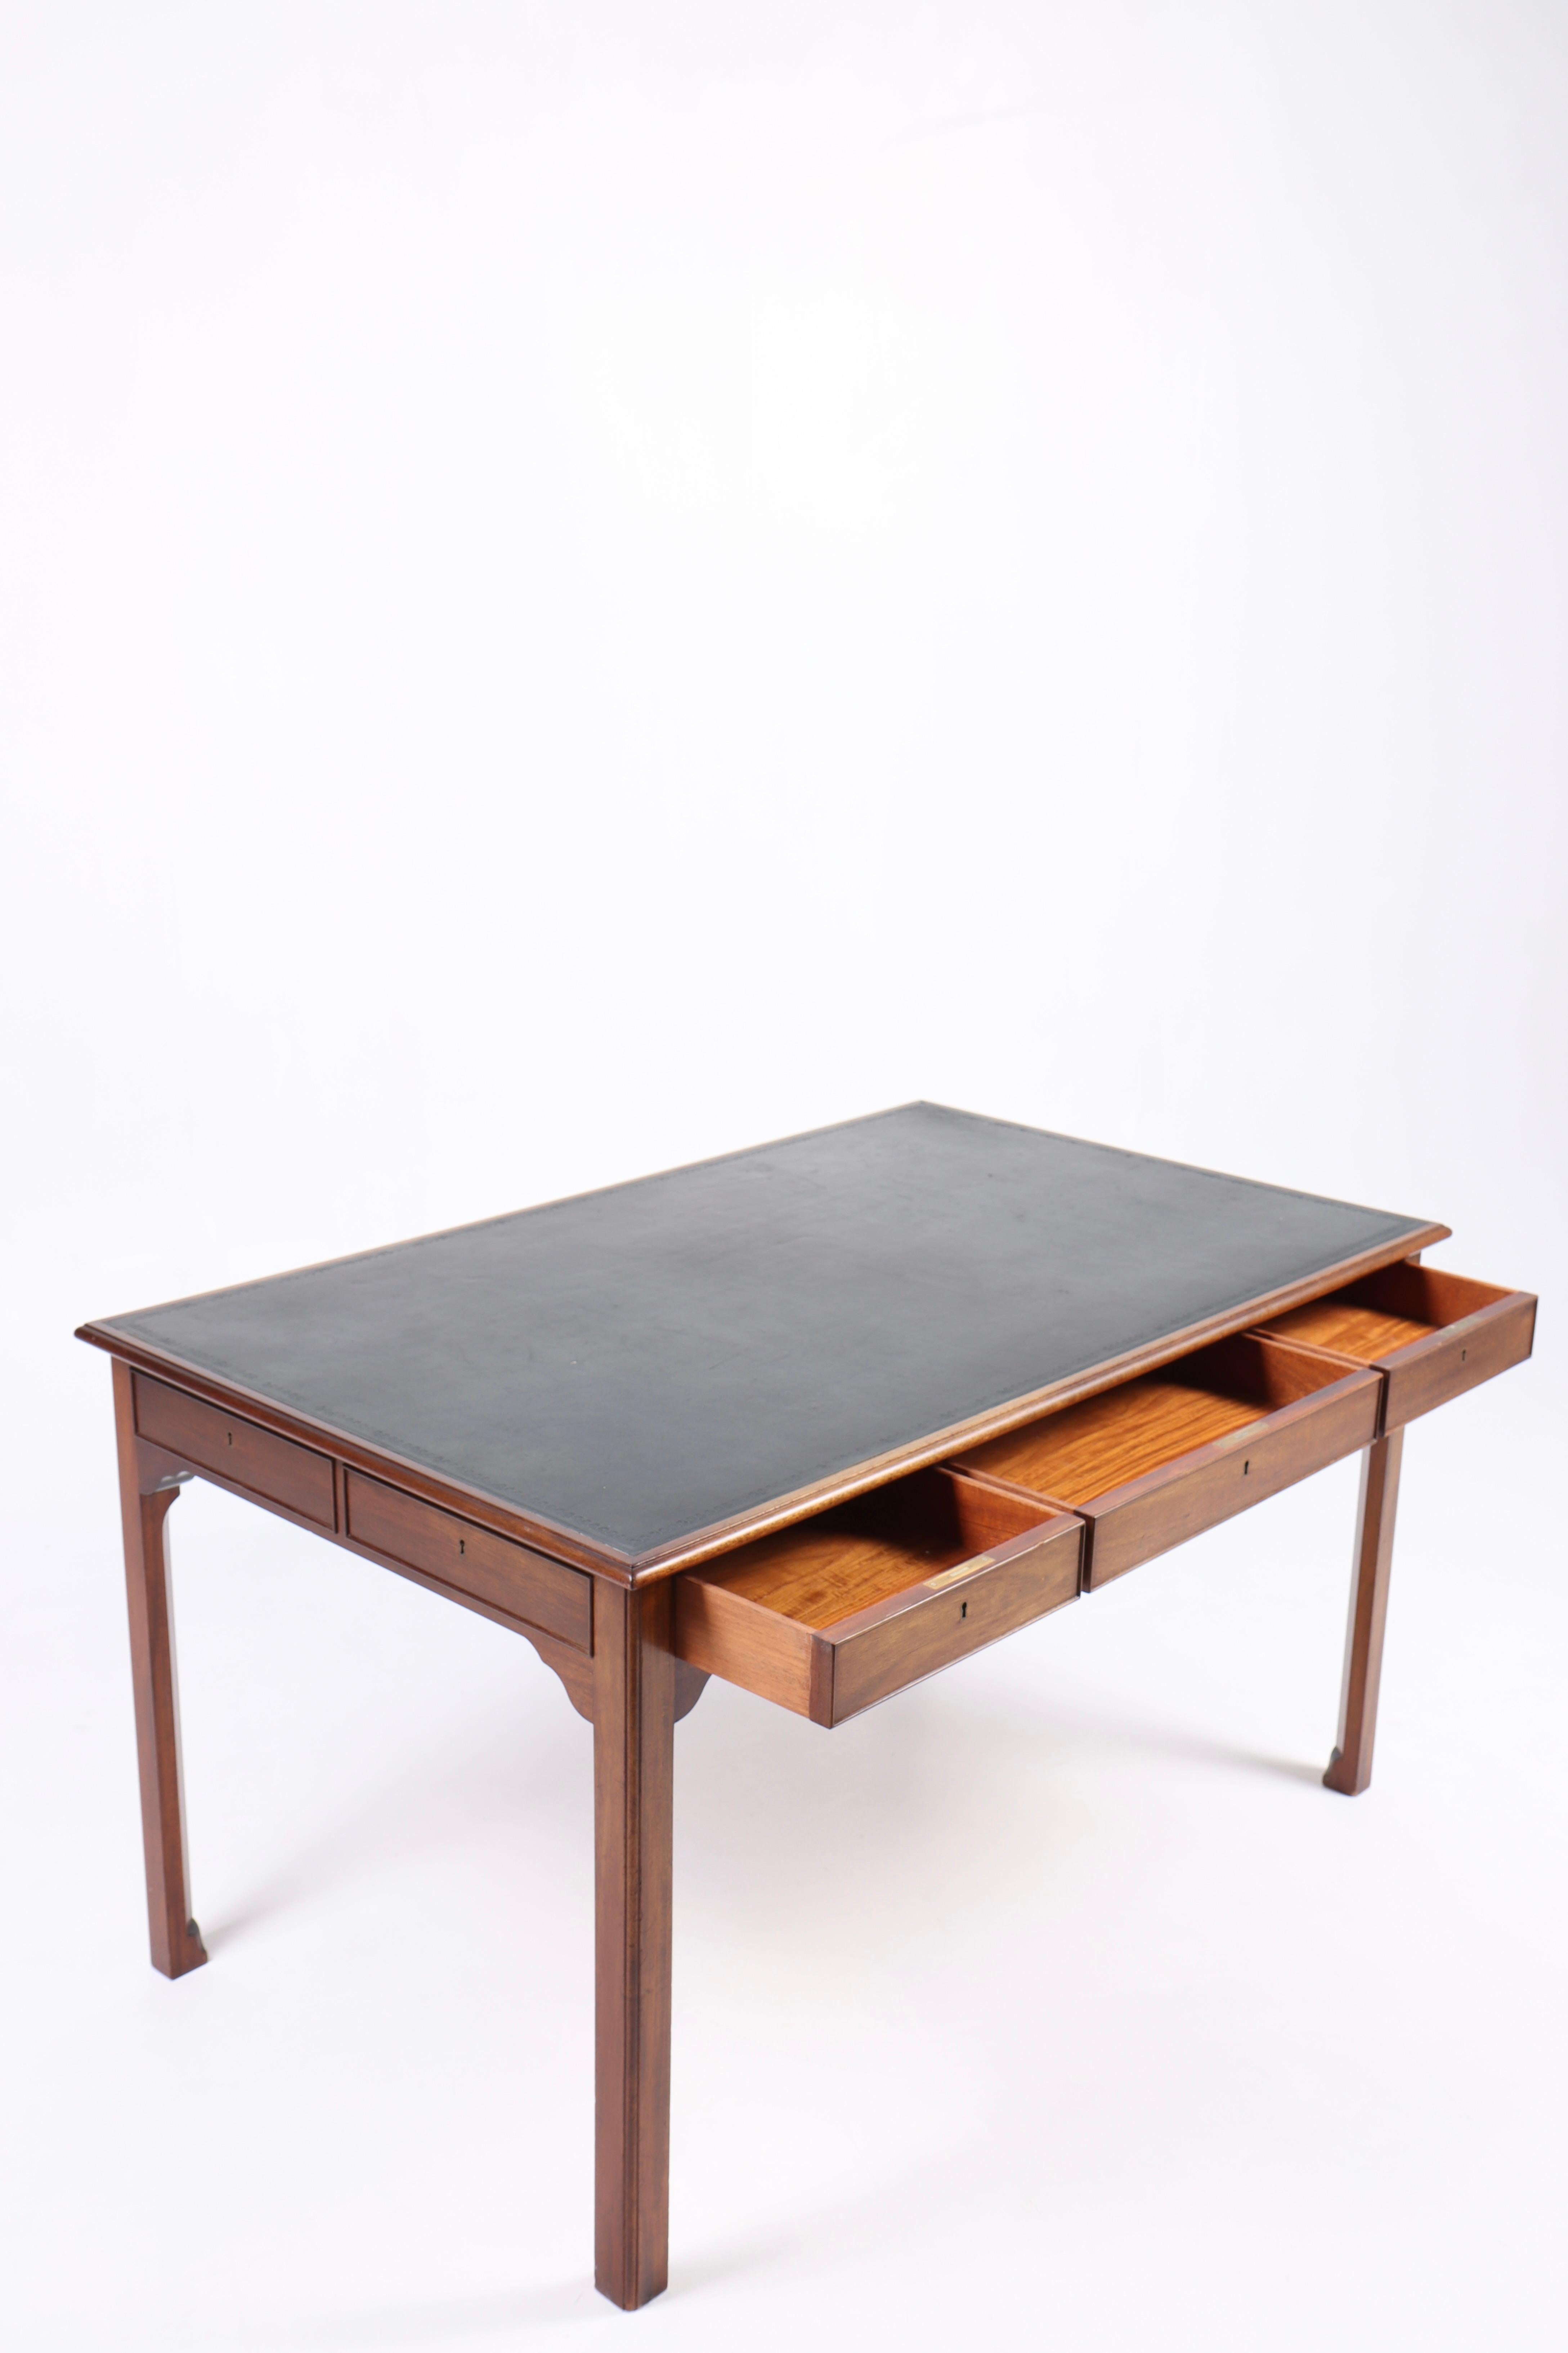 Early 20th Century Desk in Mahogany and Patinated Leather, Made in Denmark, 1950s